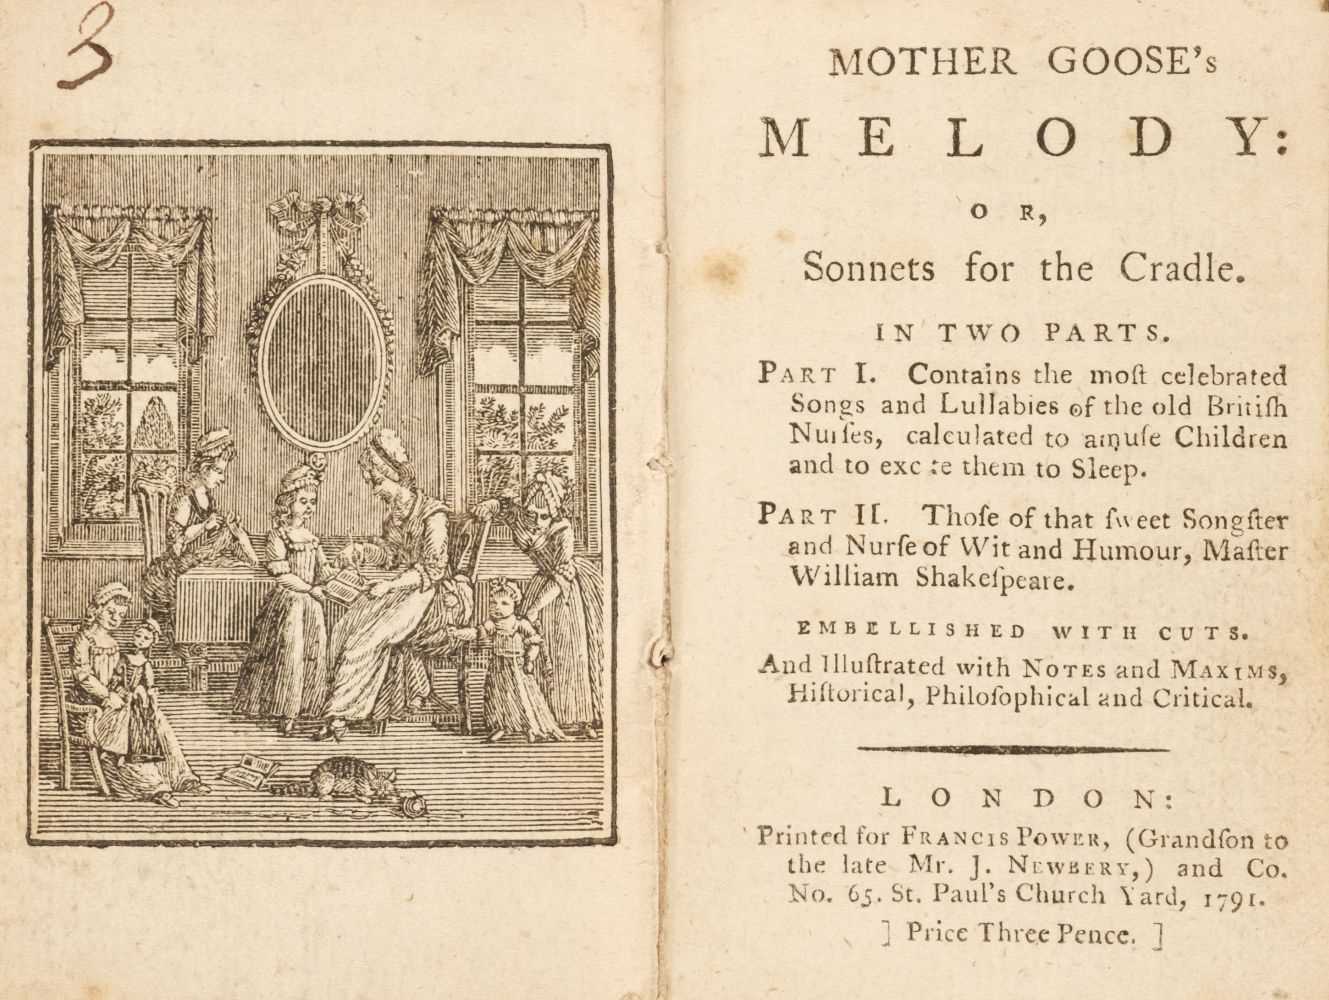 Lot 477 - Power (Francis, publisher). Mother Goose's Melody, 1791